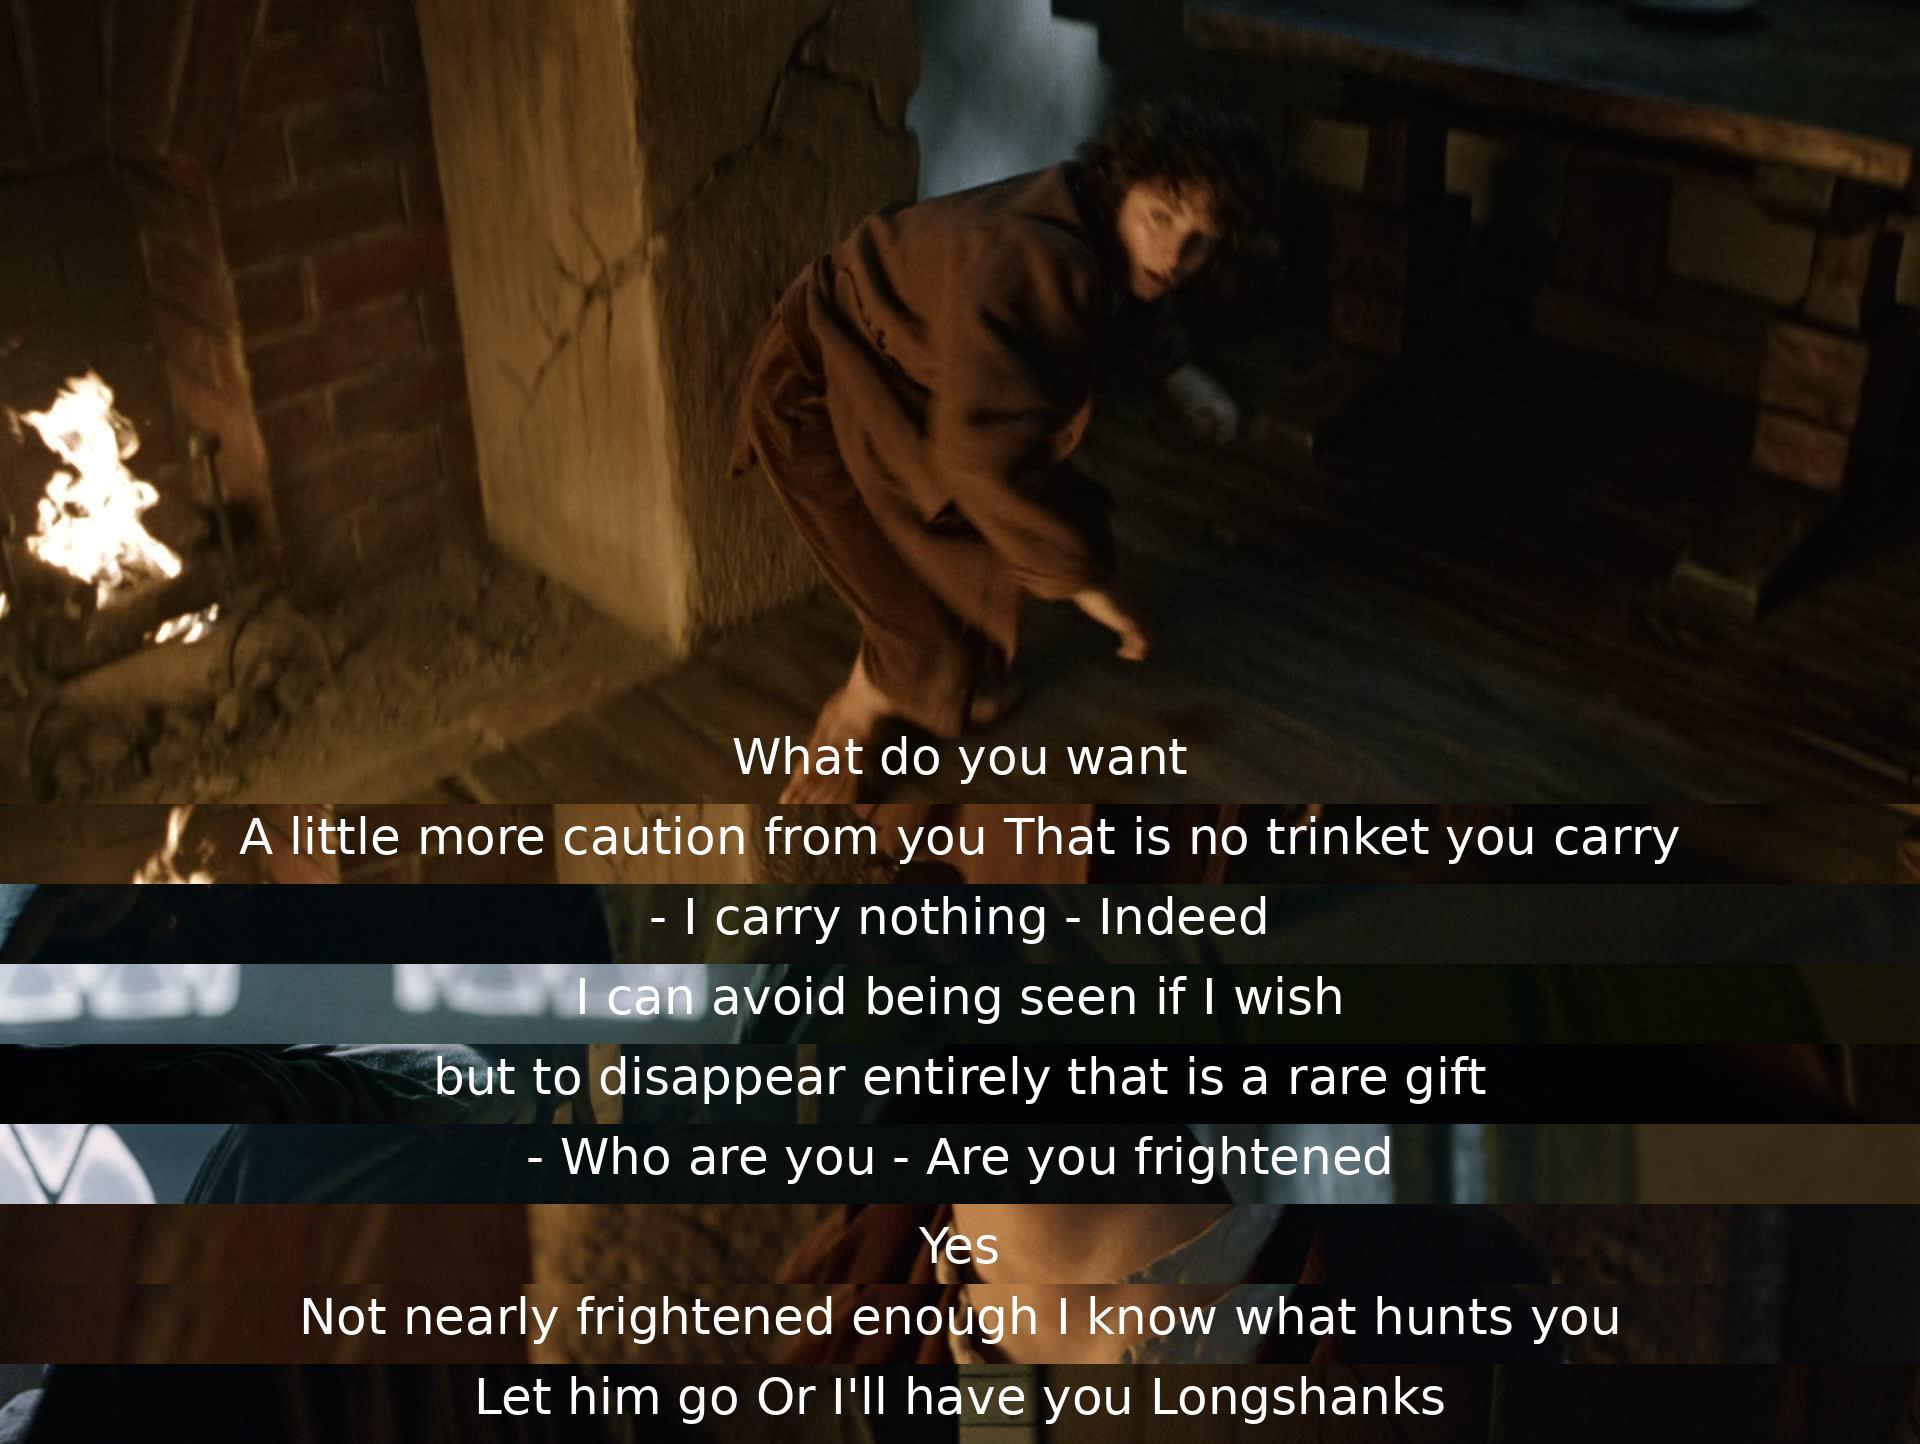 A cautionary discussion takes place as the characters engage in a tense conversation about the importance and power of the object being carried. The mysterious character underscores his ability to disappear, instilling fear in the other, who warns of impending danger if certain actions are not taken.